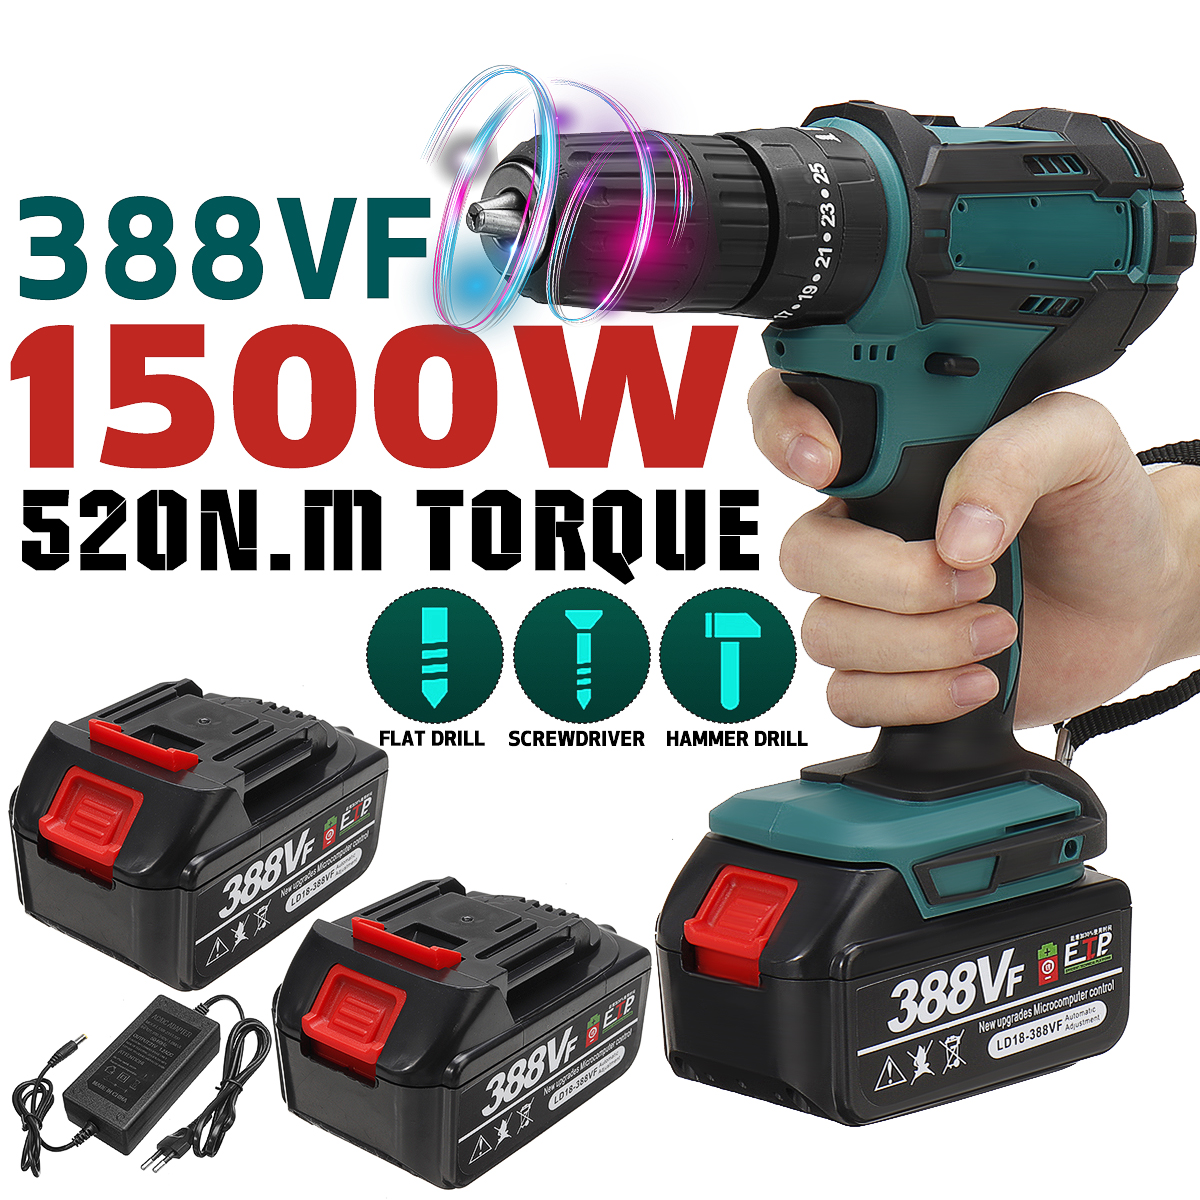 388VF-1500W-Electric-Cordless-Impact-Drill-LED-Working-Light-Rechargeable-Woodworking-Maintenance-To-1920355-1